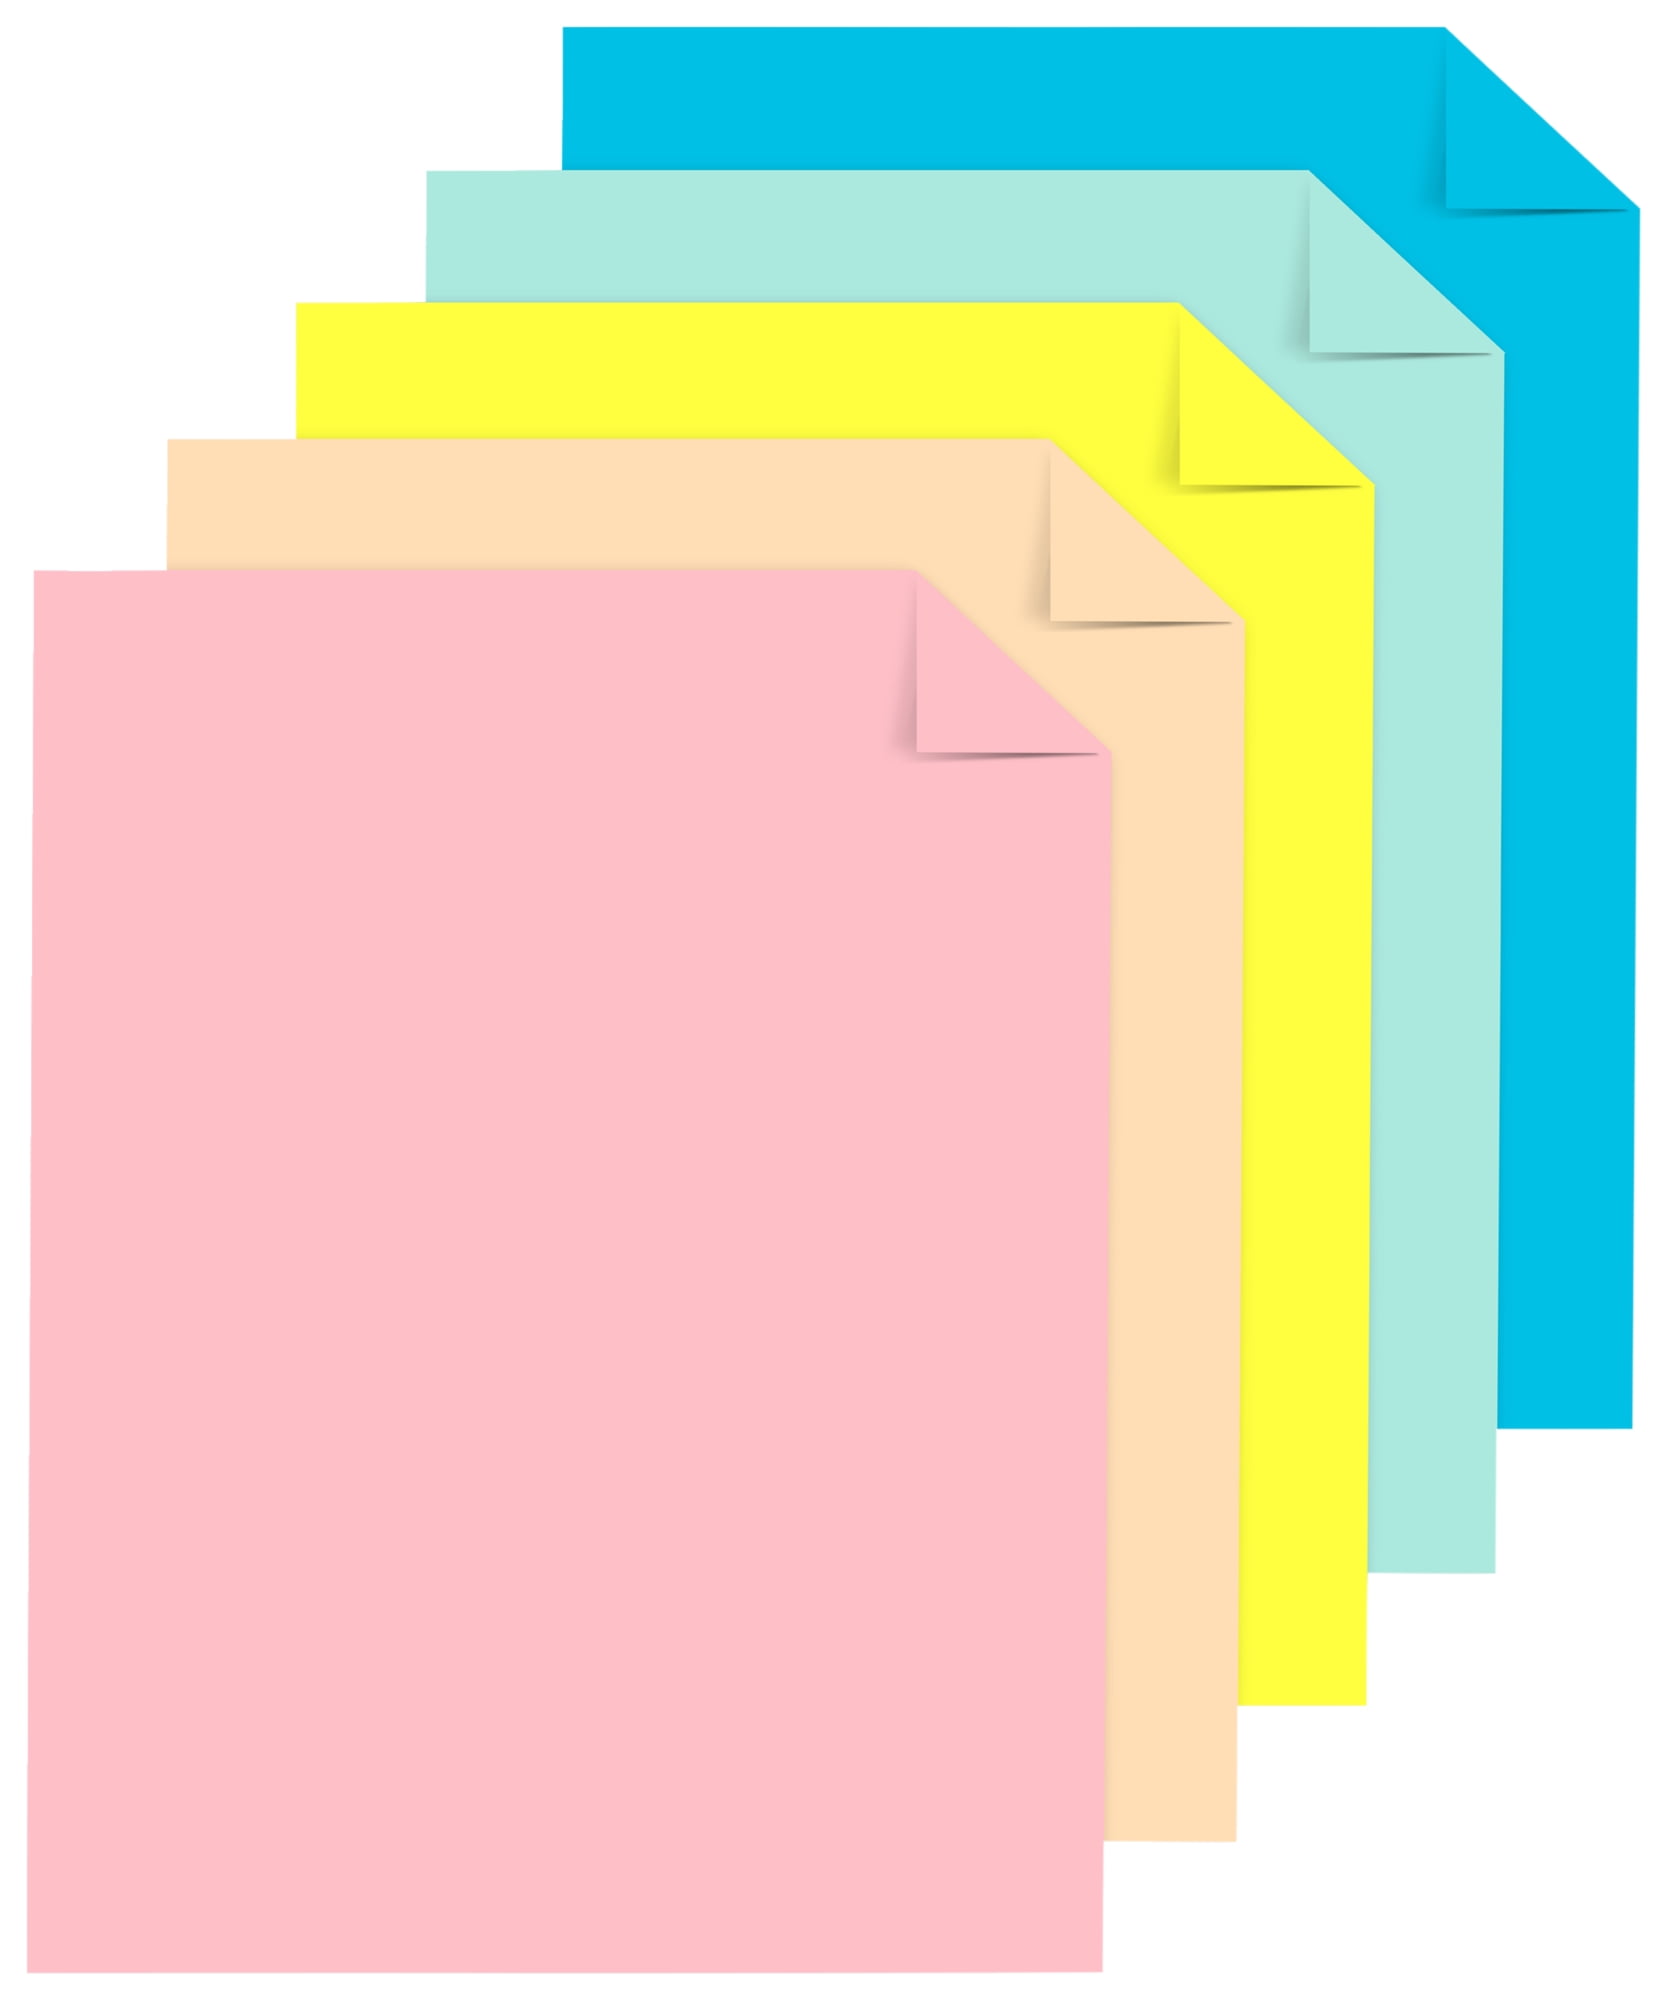 Astrobrights Punchy Pastels Colored Paper, 24 lbs, 8.5 x 11, Assorted Colors, 200 Sheets/Pack | Quill